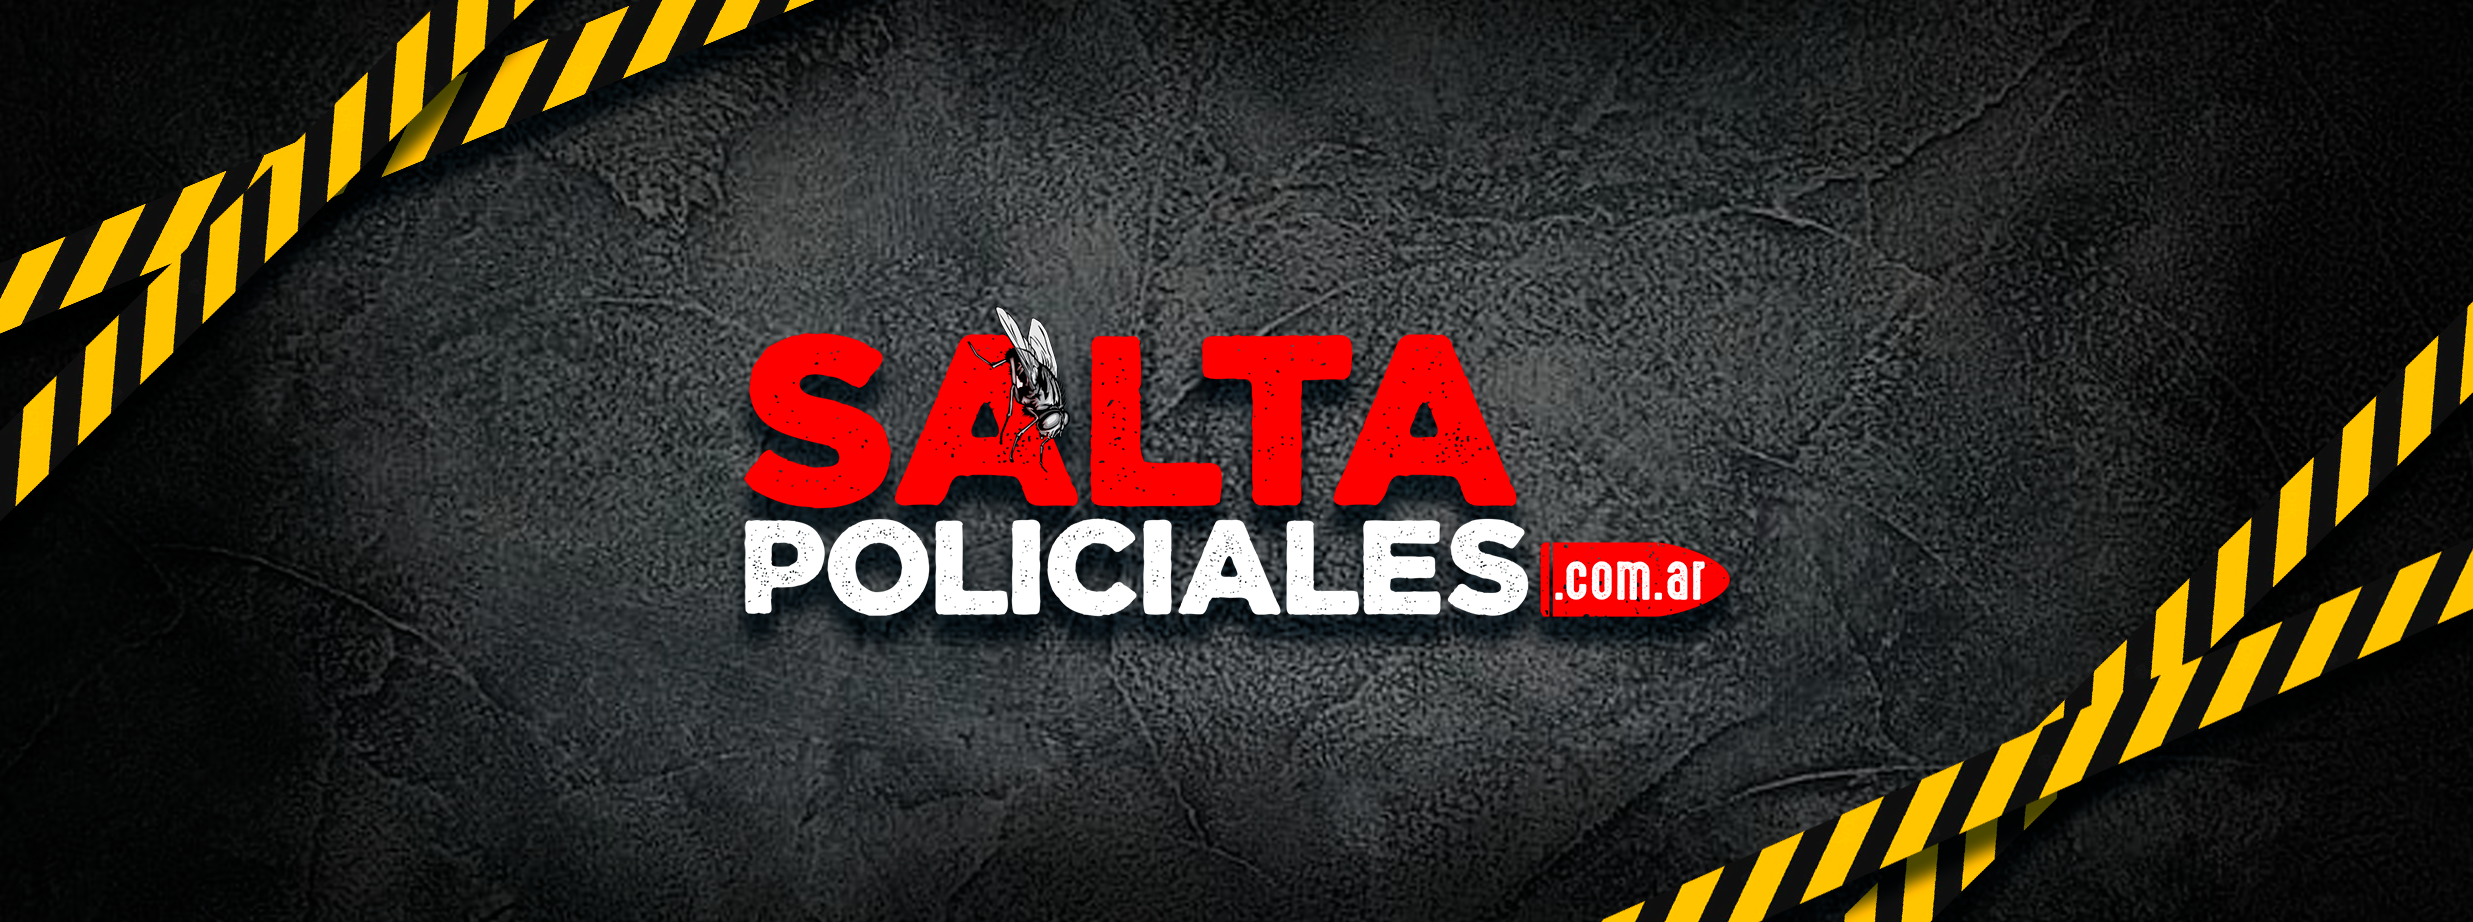 Saltapoliciales